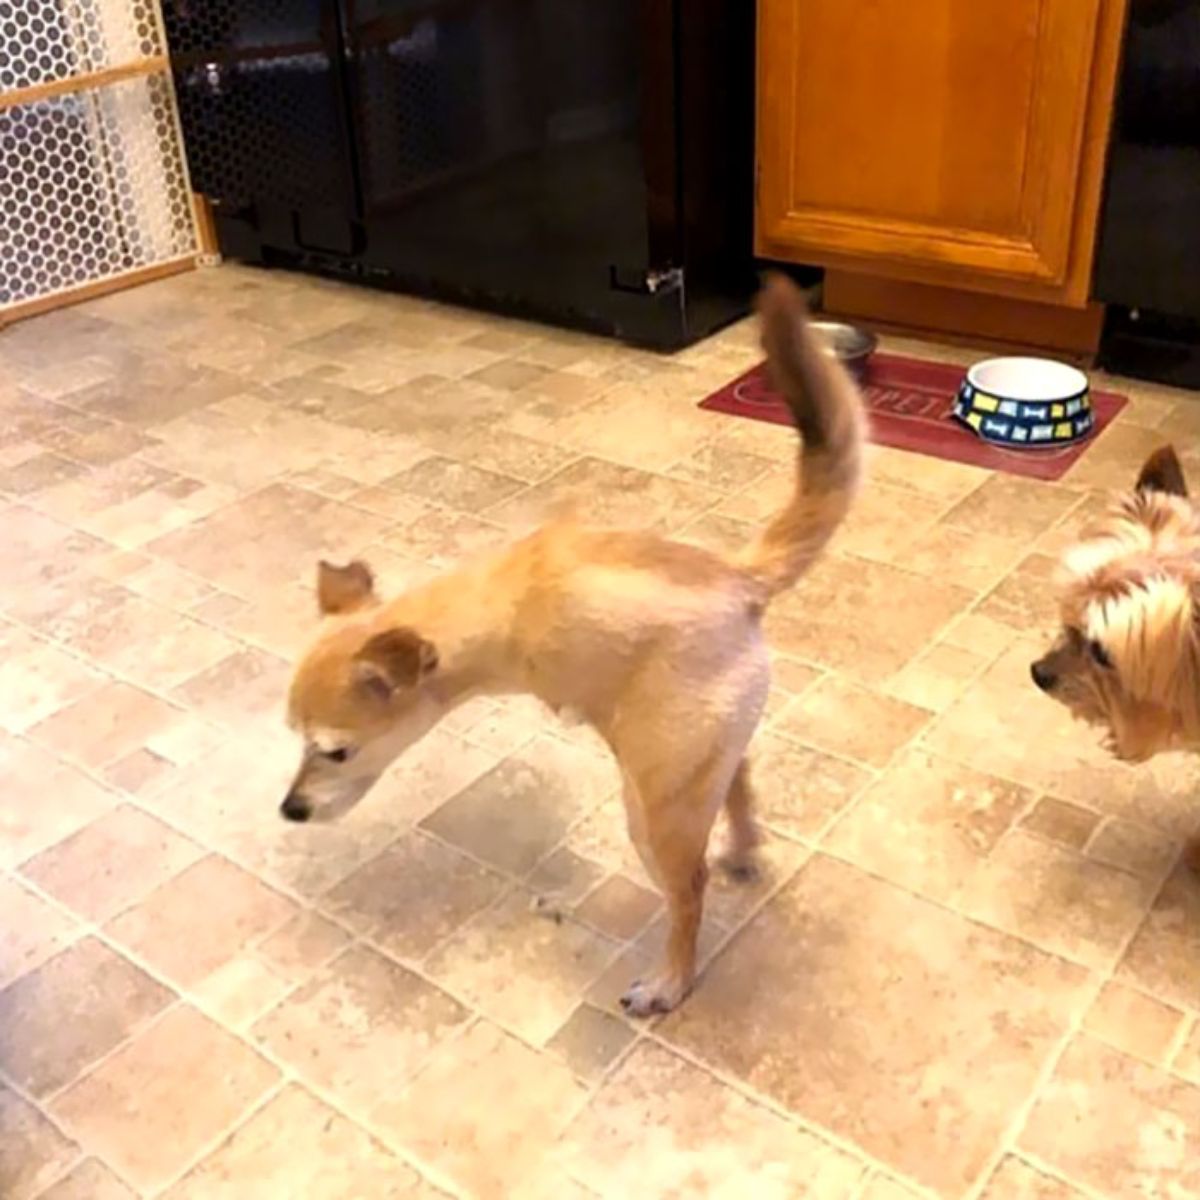 panoramic fail of small brown dog with no front legs and a short body with a yorkshire terrier sniffing behind it